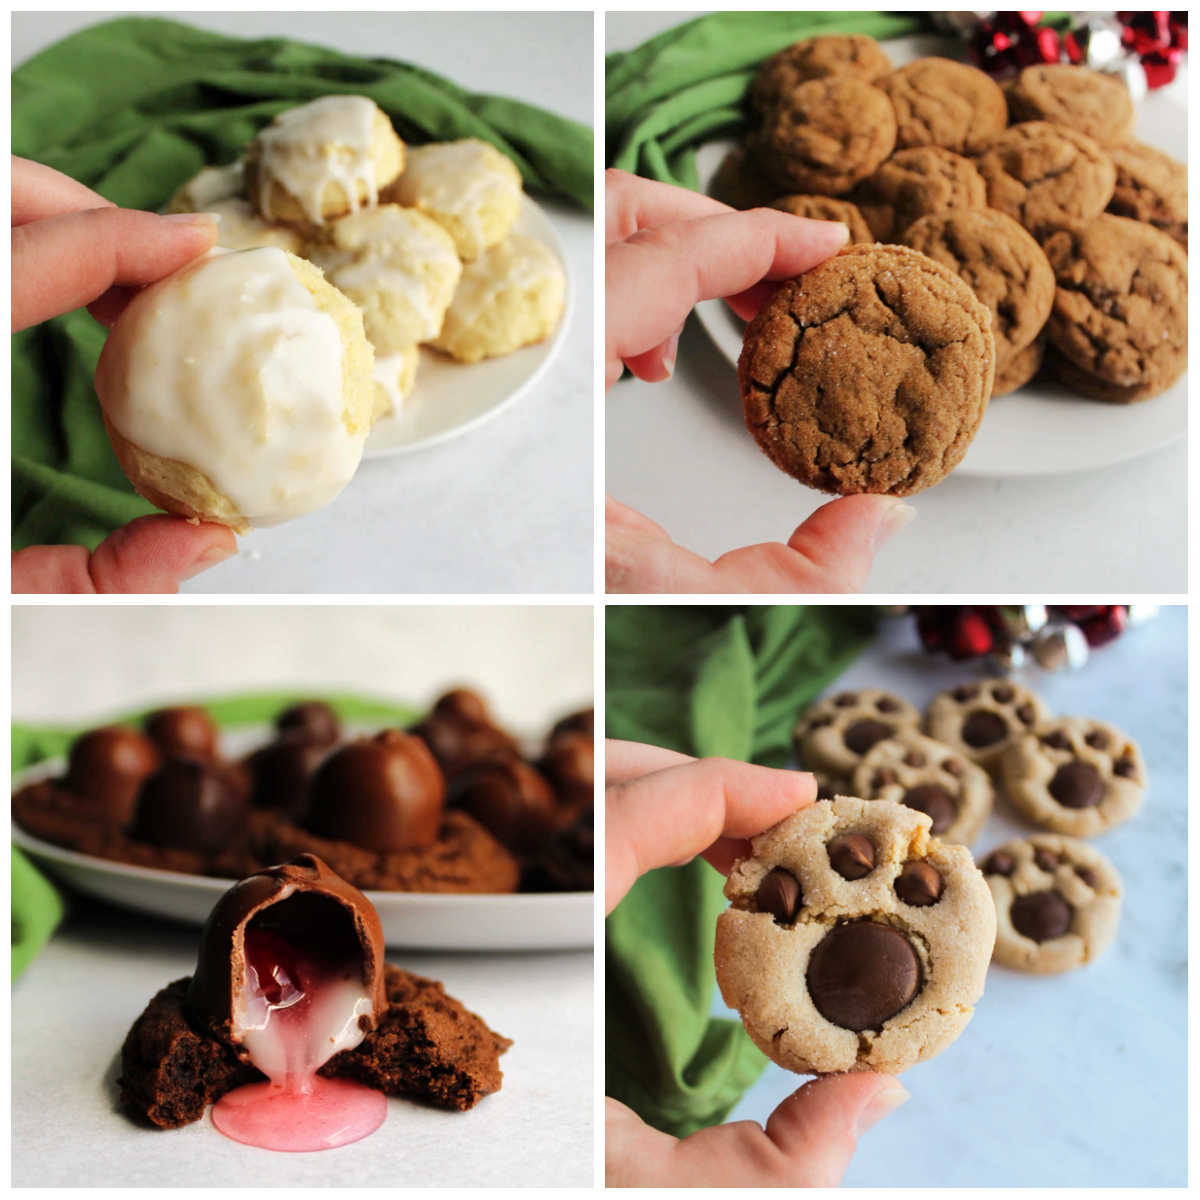 Collage of images of cookies including soft lemon cookies, molasses spice cookies, chocolate covered cherry blossoms and bear paw cookies.